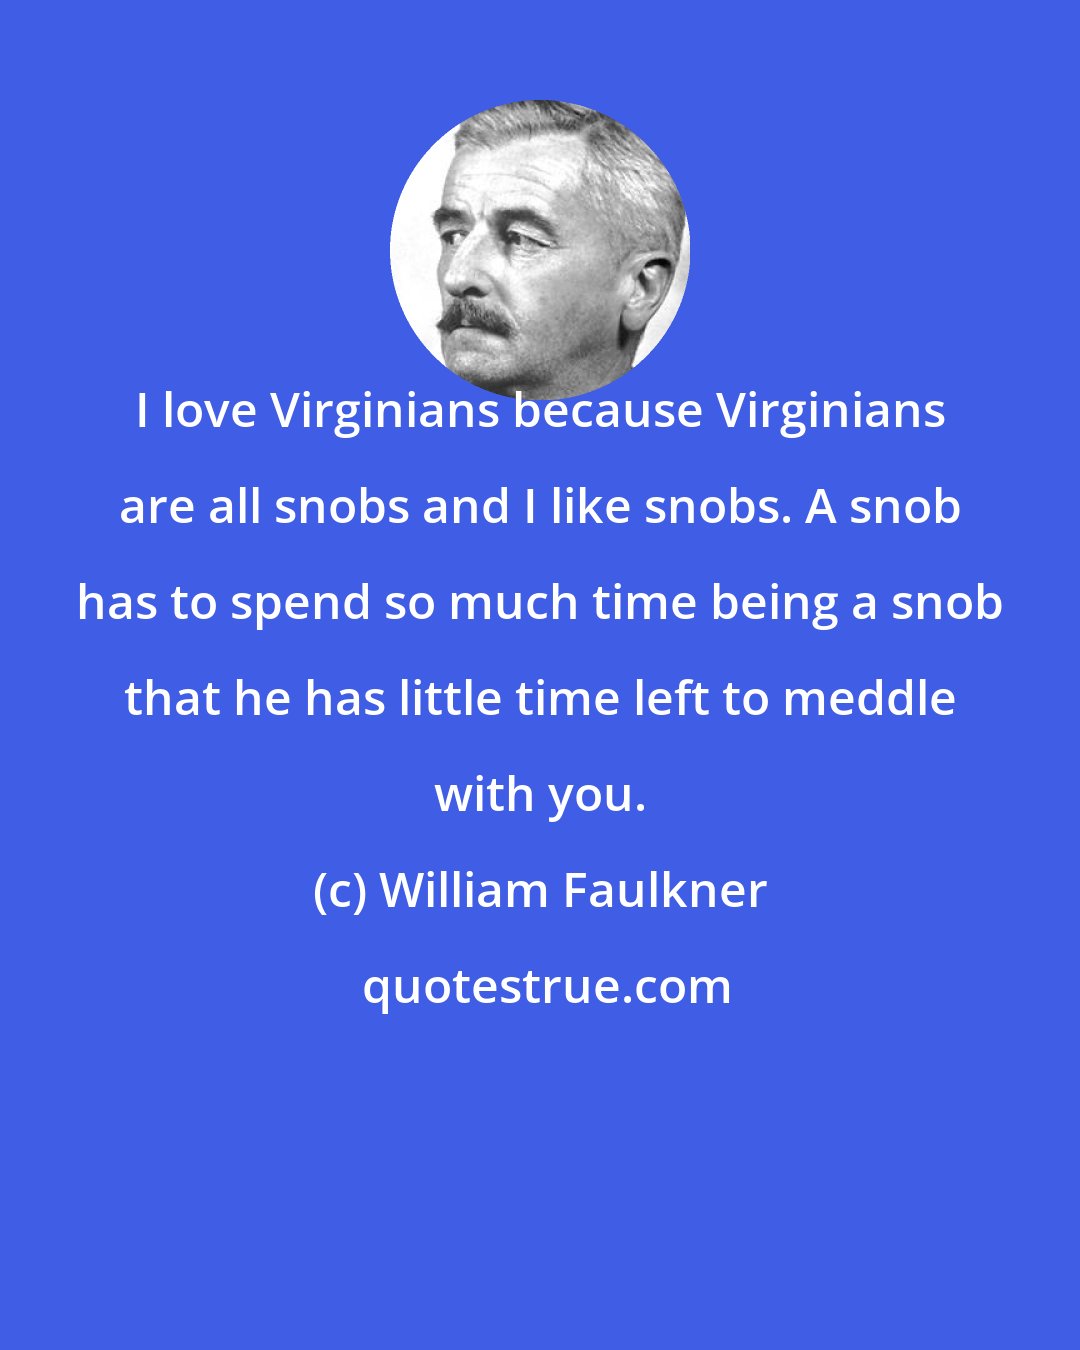 William Faulkner: I love Virginians because Virginians are all snobs and I like snobs. A snob has to spend so much time being a snob that he has little time left to meddle with you.